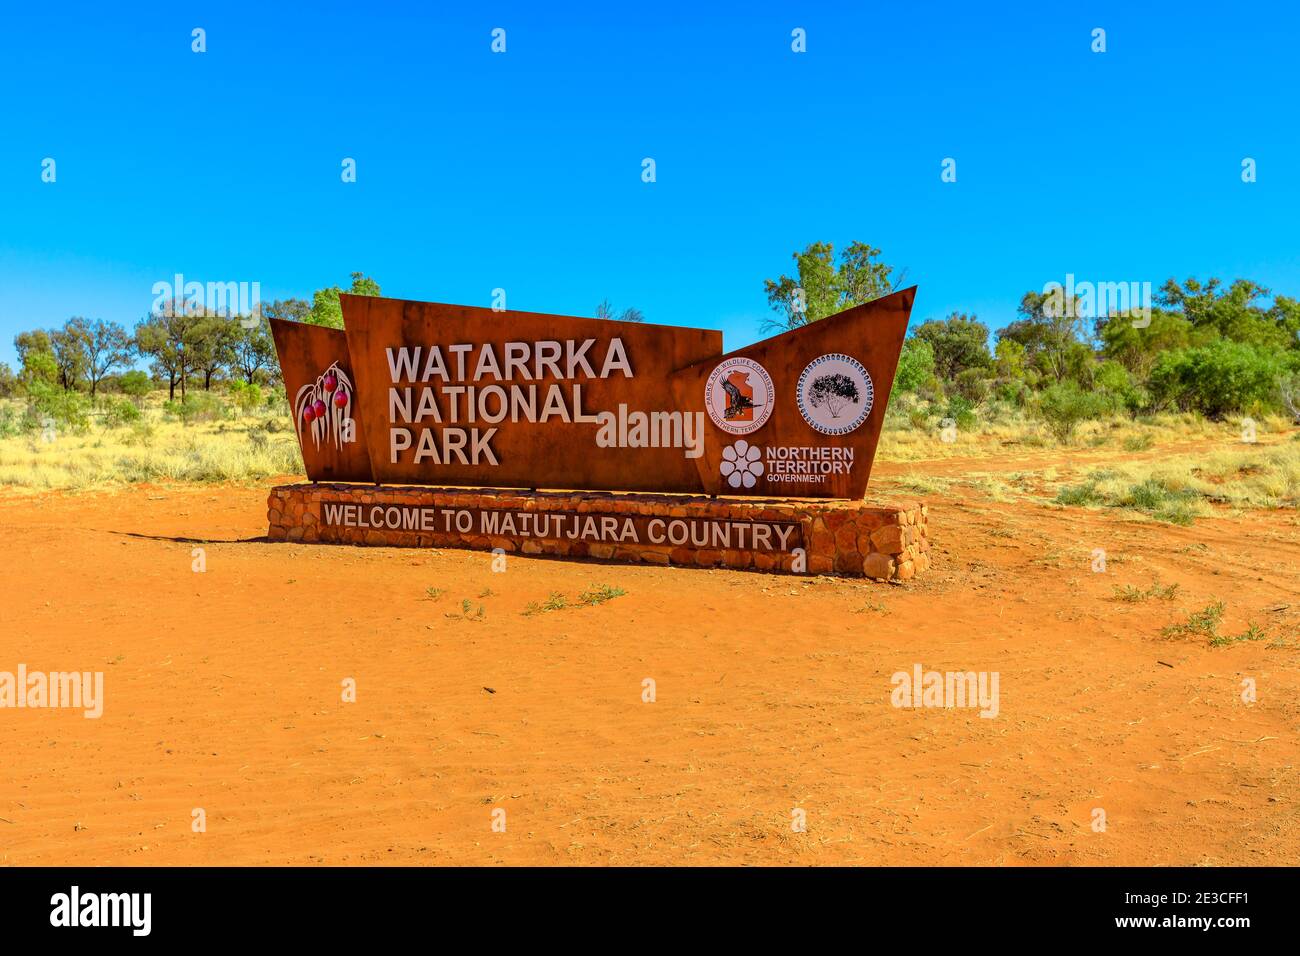 Kings Canyon, Northern Territory, Australia - Aug 21, 2019: entrance welcome to Watarrka National Park, Outback Red Center.The park is between West Stock Photo